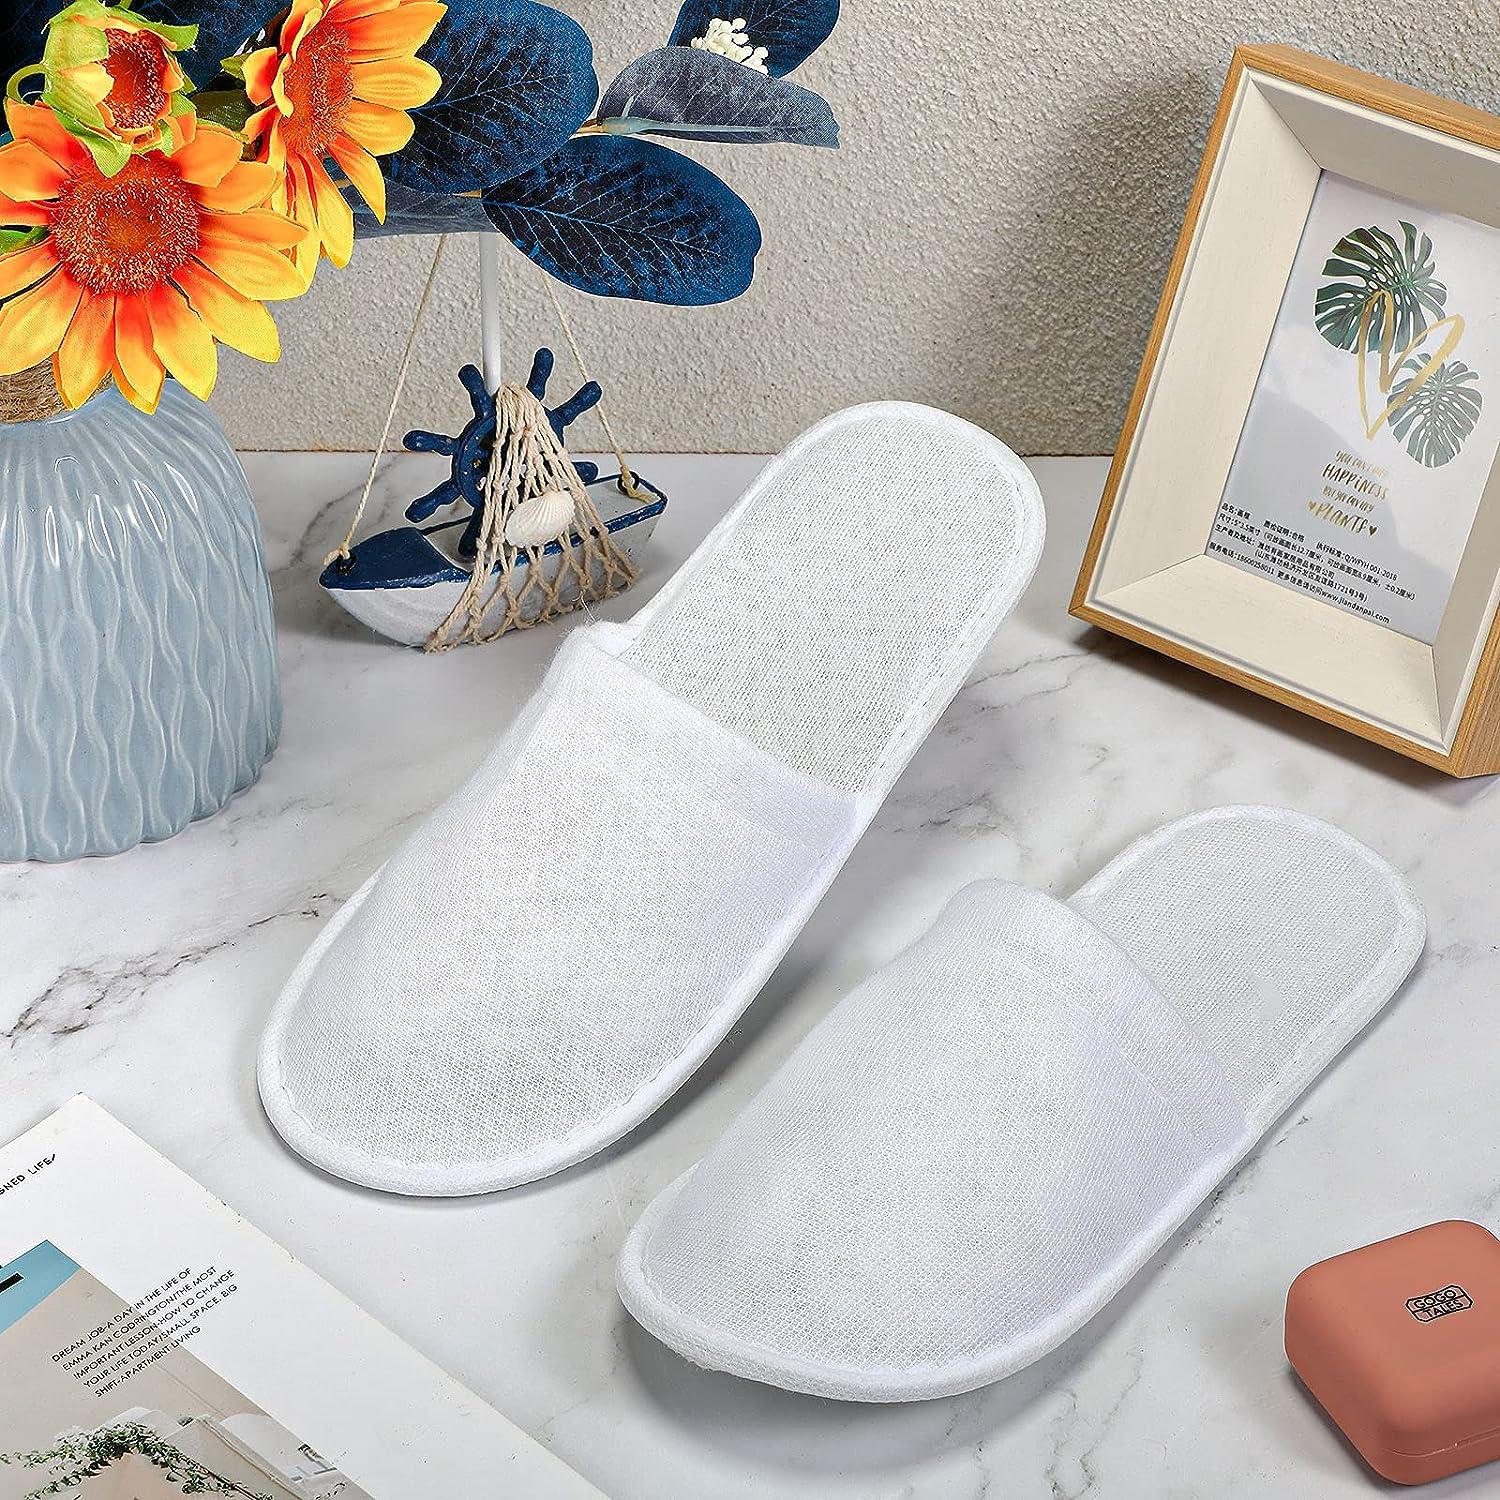 Buy Diktmark White Disposable Slippers, Cotton Hotel, Salons, Spa Slippers  for Women and Men, Breathable Non-Slip Slippers for Hotel, Guests,Travel/bathroom  slippers/slippers for indoor (Pack of 10) at Amazon.in